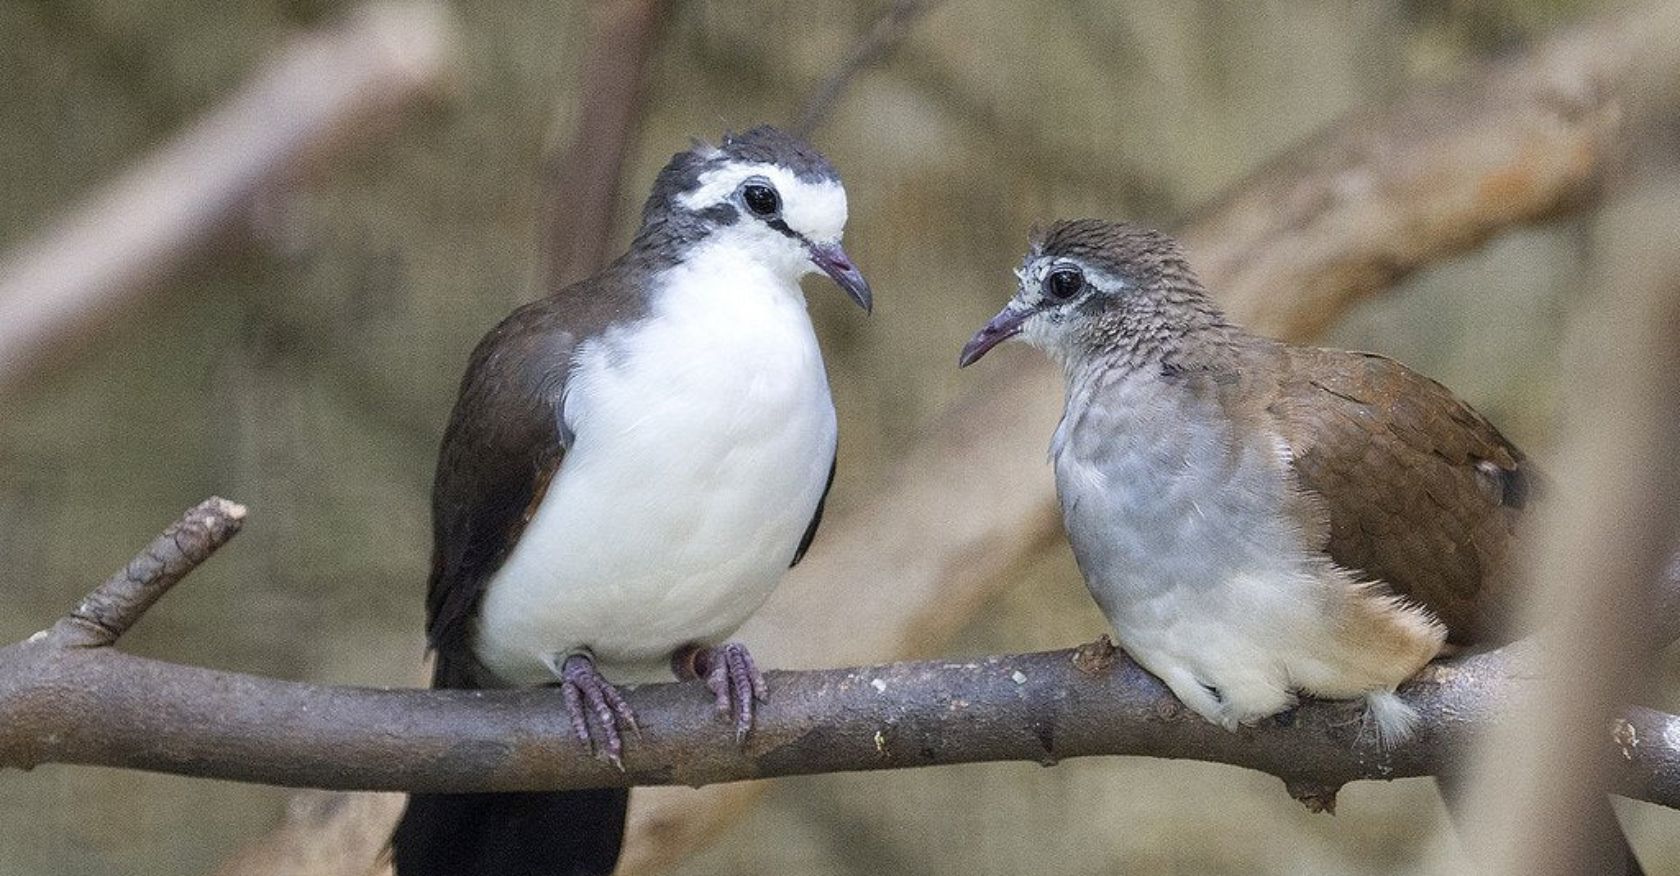 The Tambourine Dove: A Musical Bird with a Unique Call and a Striking Appearance